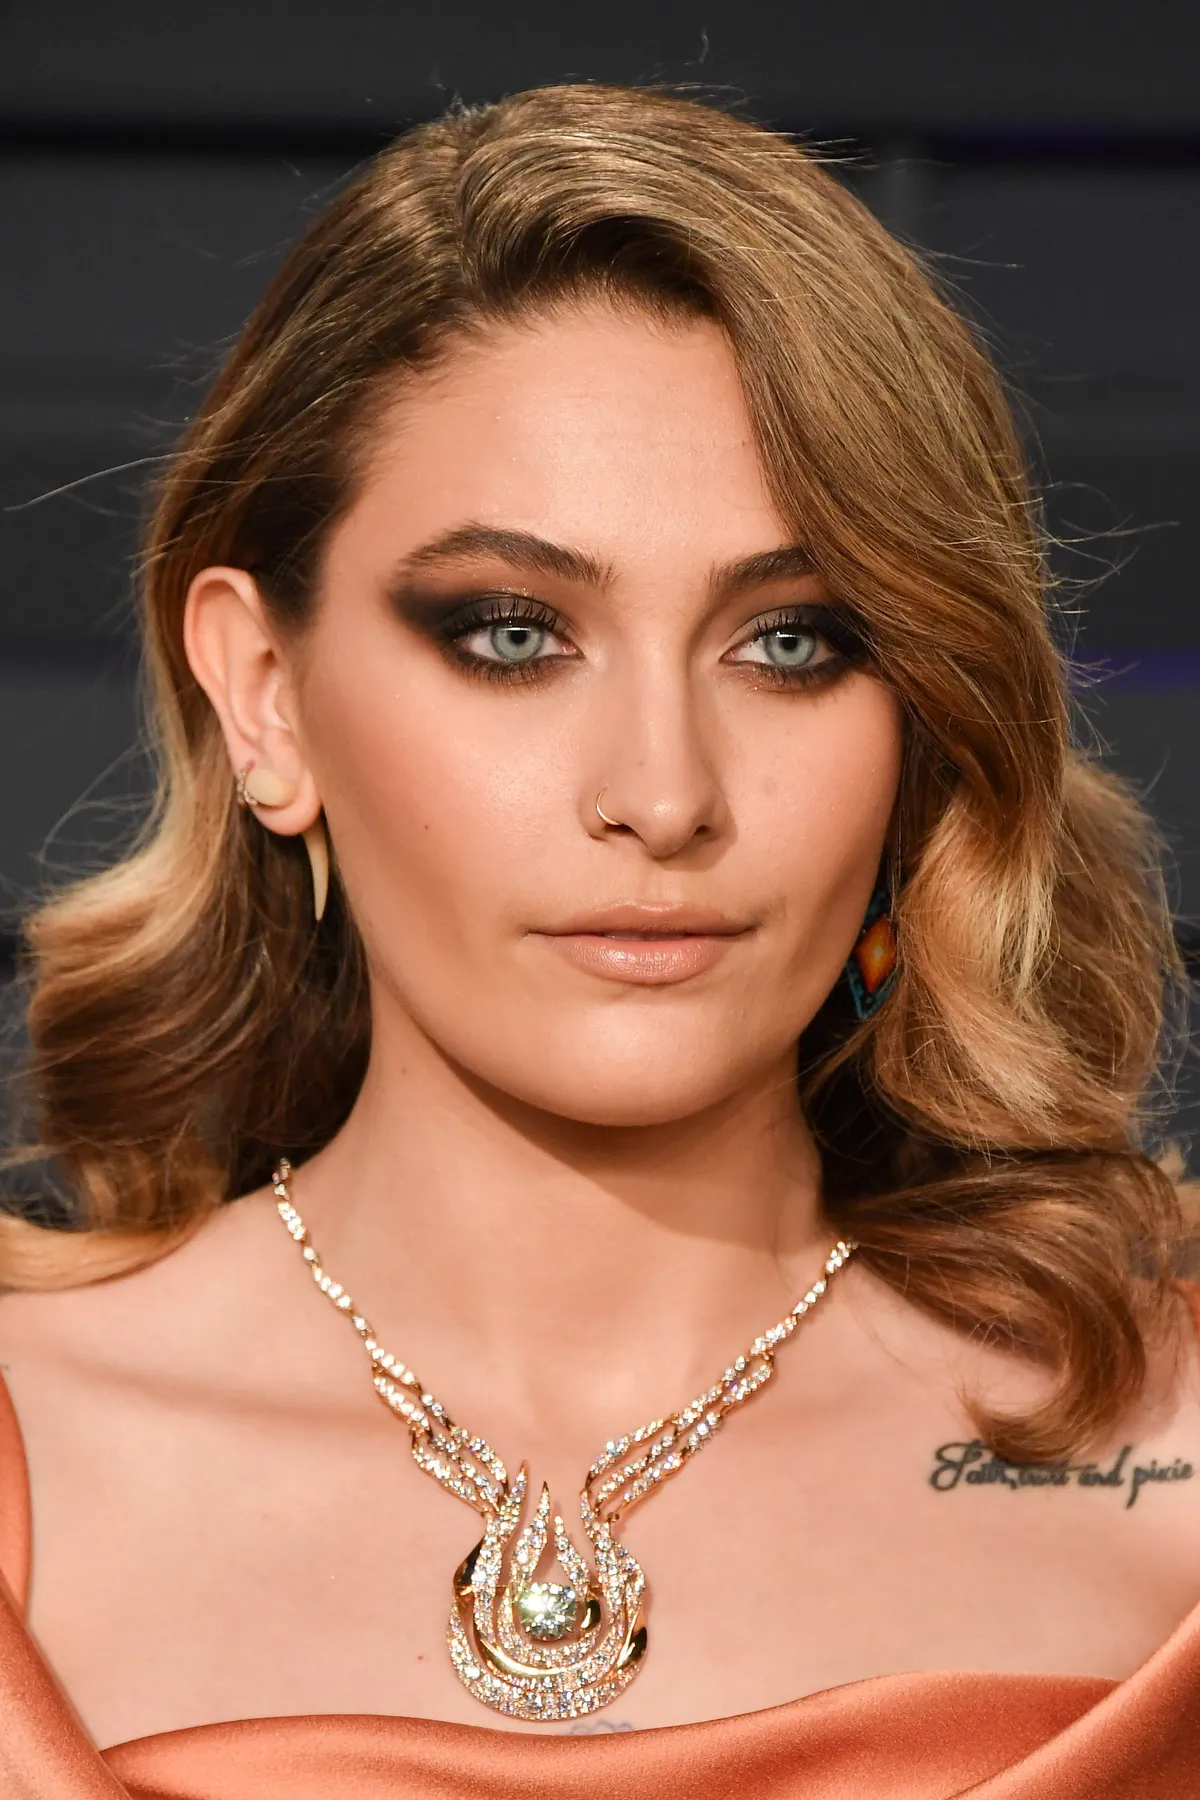 Paris Jackson attends the 2019 Vanity Fair Oscar Party at Wallis Annenberg Center on February 24, 2019. | Photo: Getty Images